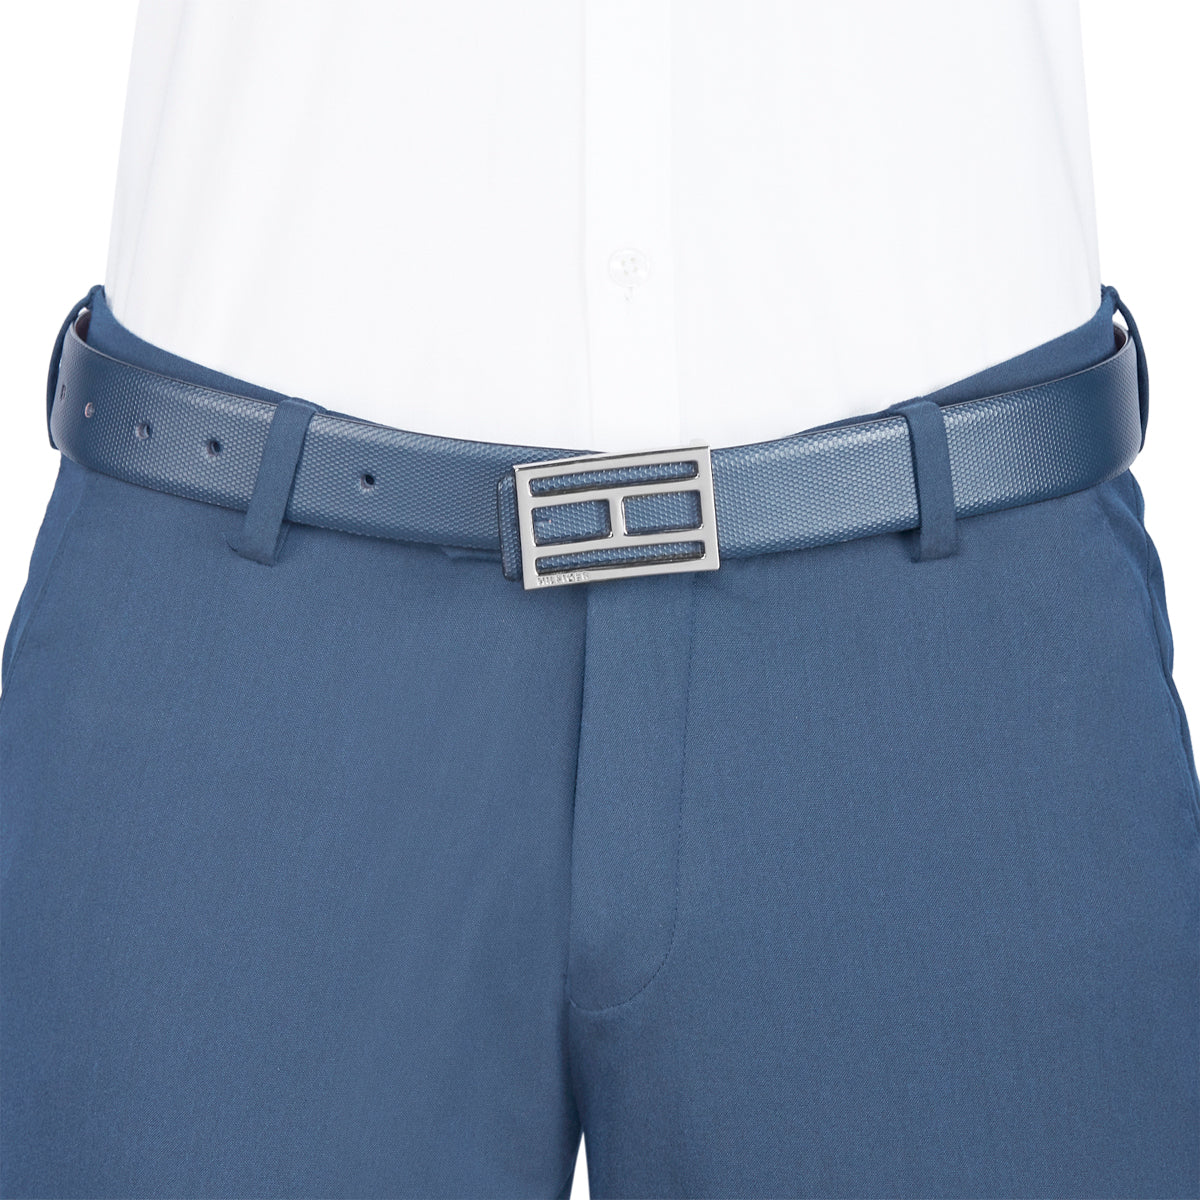 Tommy Hilfiger Thisted Men's Reversible Leather Belt-Tan-Navy